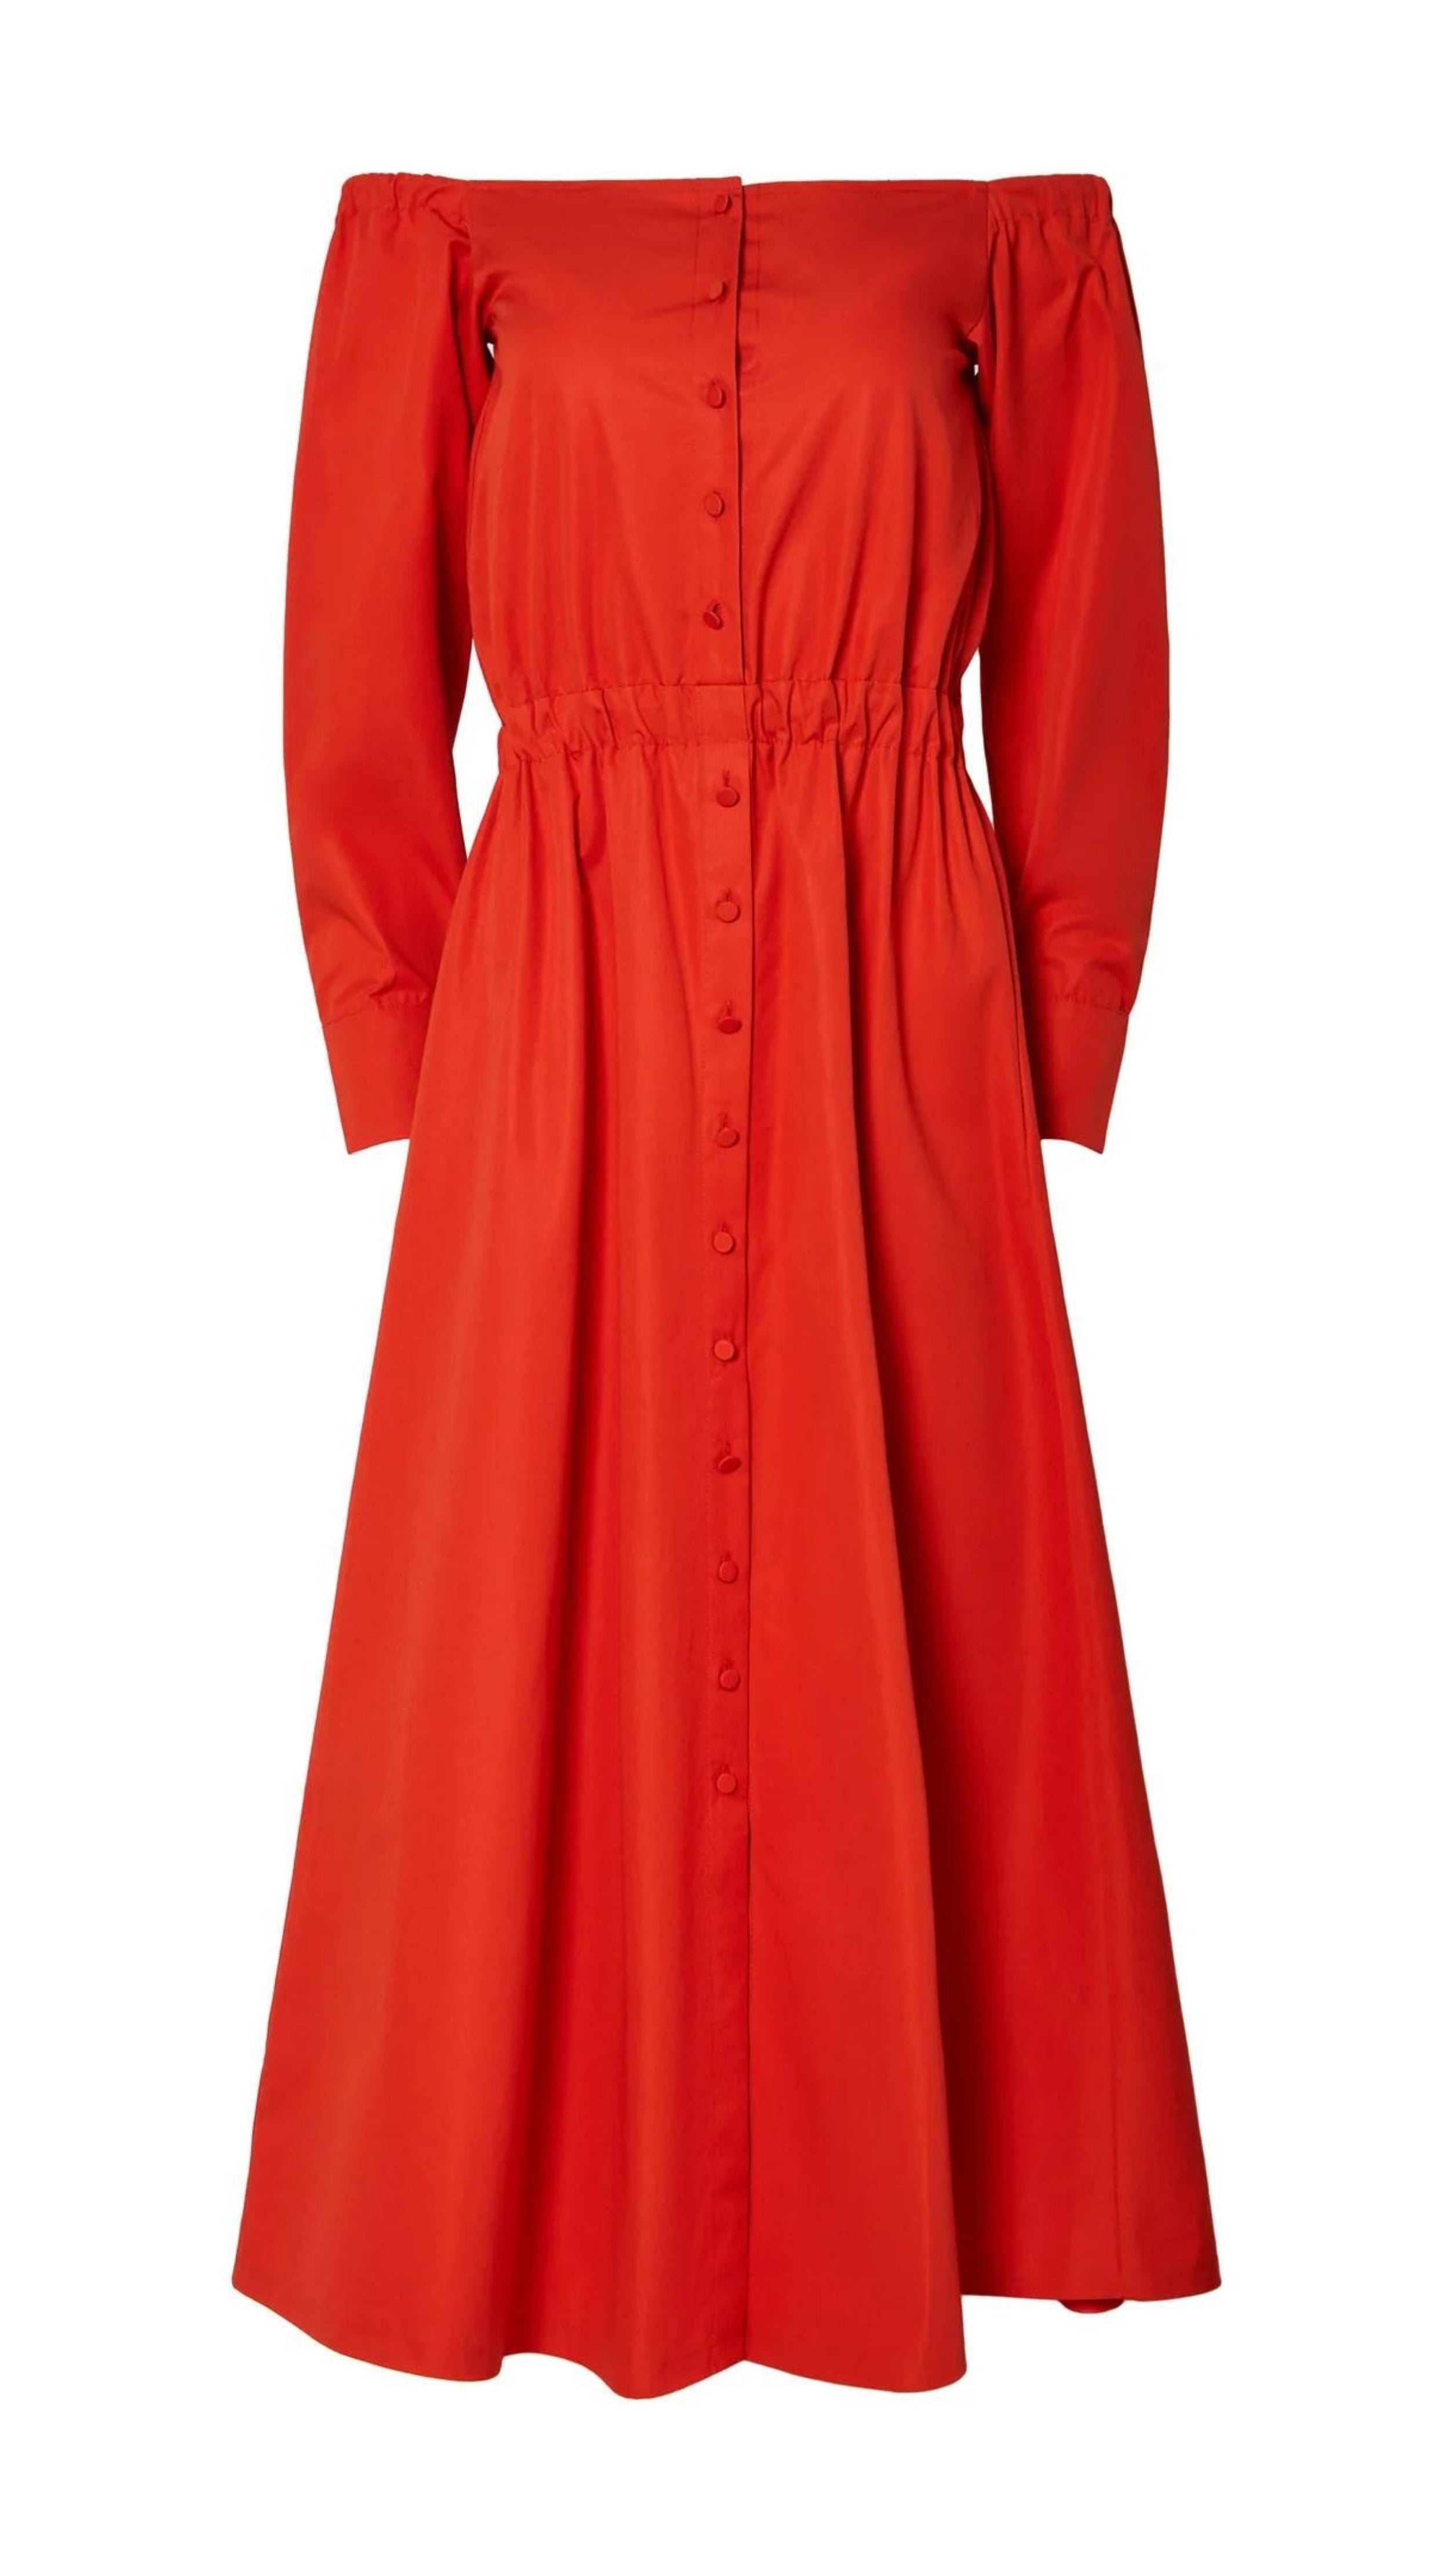 Altuzarra Zora dress shirt dress style soft cotton midi dress in red orange color. Made in Italy. The dress has off the shoulder neckline, puff sleeves and an elasticated waist waistband. Product photo from front.